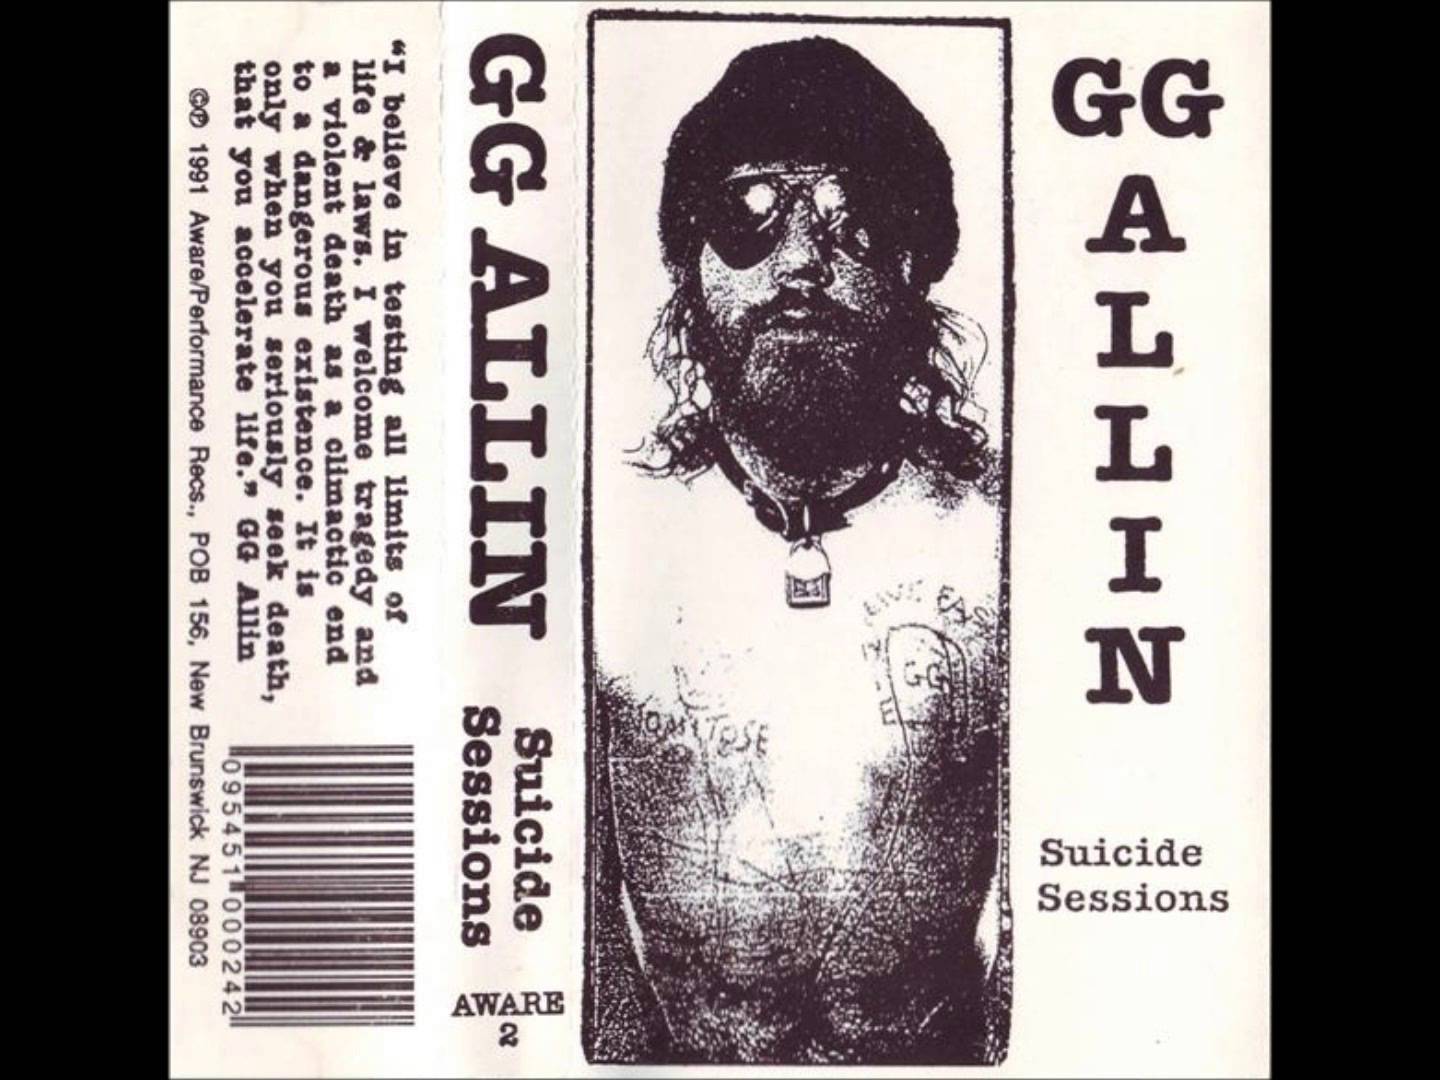 GG Allin suicide sessions